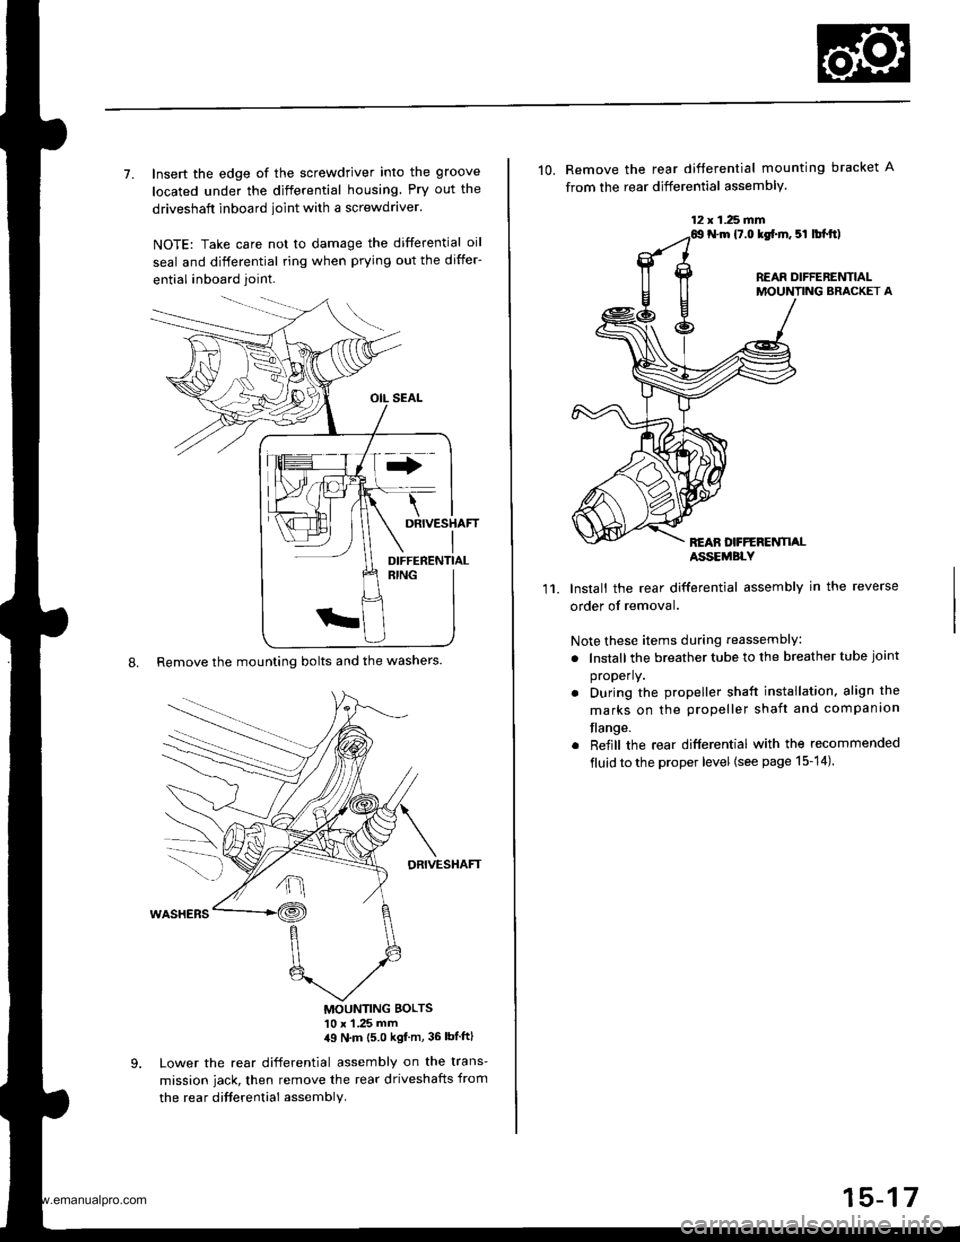 HONDA CR-V 1997 RD1-RD3 / 1.G Owners Manual 
7. Insert the edge of the screwdriver into the groove
located under the differential housing Pry out the
driveshaft inboard ioint with a screwdraver.
NOTE: Take care not to damage the differential oi